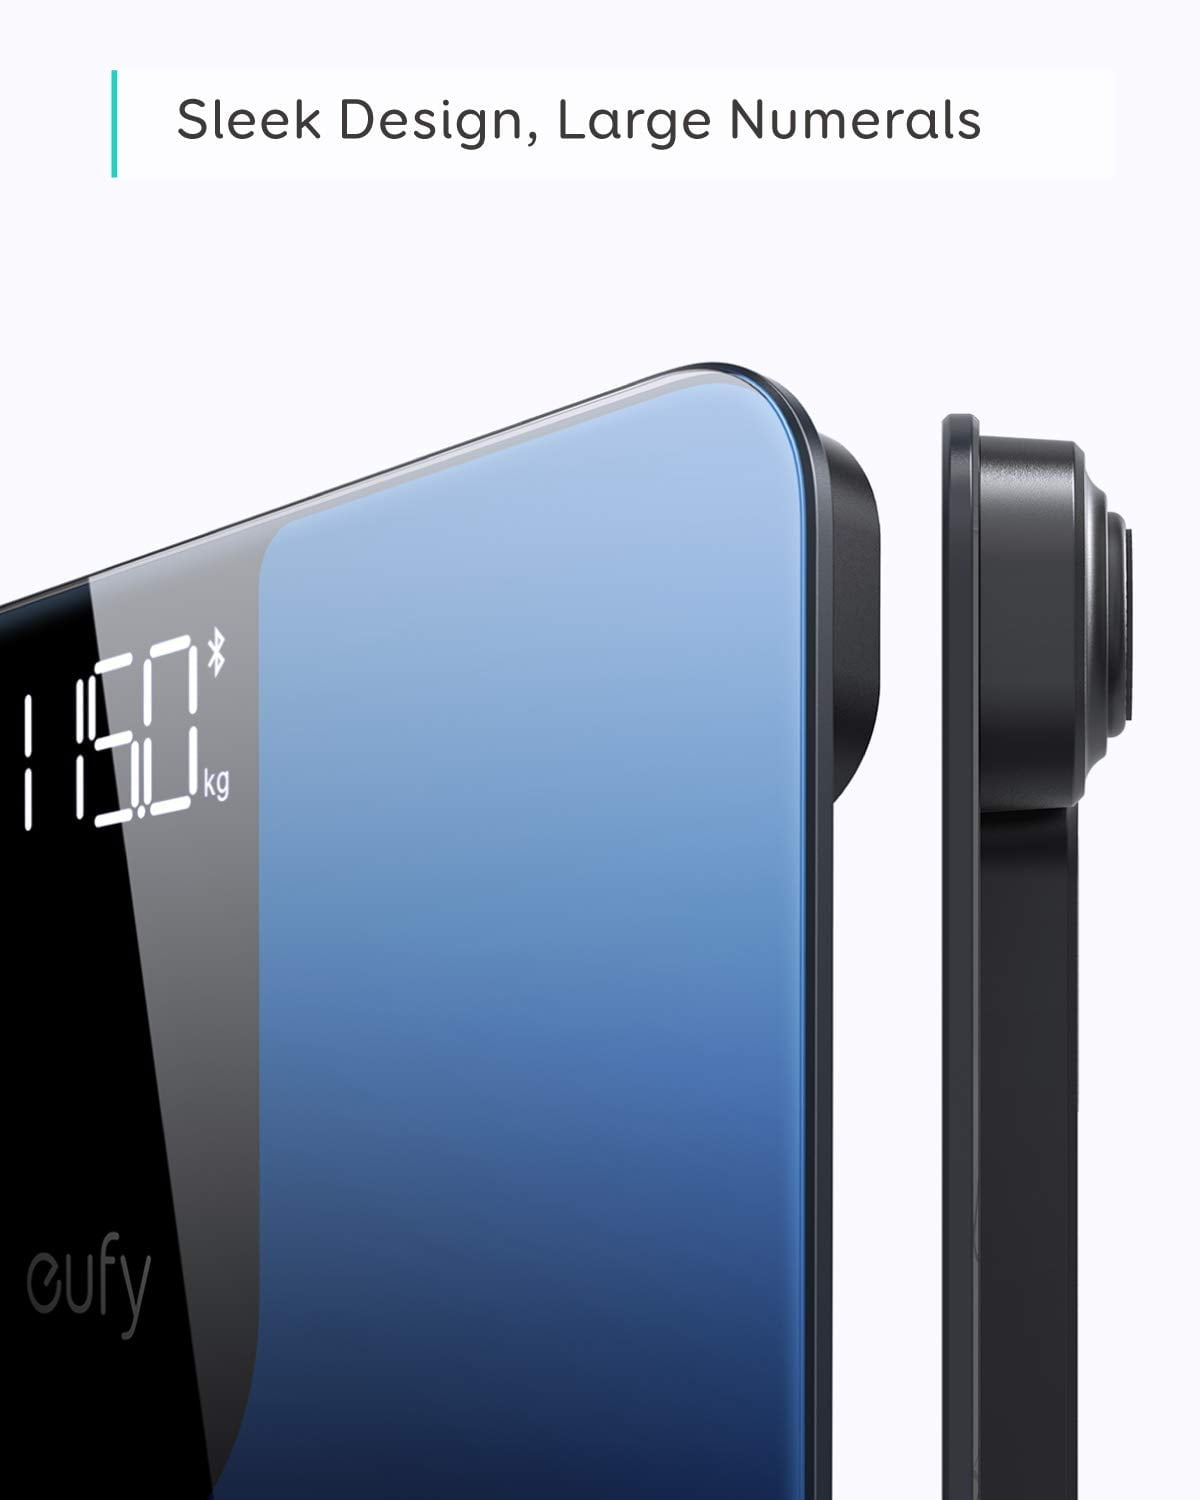 61P2Qler7Dl. Sl1500 Eufy &Lt;H1 Class=&Quot;Product-Meta__Title Heading H1&Quot;&Gt;Eufy Smart Scale P1&Lt;/H1&Gt; Https://Www.youtube.com/Watch?V=Kn4Qhmkz1Rc &Lt;Ul&Gt; &Lt;Li&Gt;Holistic Health: Instantly Learn 14 Insightful Measurements Of Your Body'S Health, Such As Weight, Body Fat, Bmi, Bone Mass, Muscle Mass, And More.&Lt;/Li&Gt; &Lt;Li&Gt;Use With 3Rd-Party Apps: Track Your Measurements On Apple Health, Google Fit, And Fitbit.&Lt;/Li&Gt; &Lt;Li&Gt;Accuracy Improved By 10%: Two Pairs Of Super-Sensitive G-Shaped Sensors Ensure More Precise Measurements Compared To Other Sensor Types.&Lt;/Li&Gt; &Lt;Li&Gt;For The Whole Family: Track The Health Trends Of Up To 16 Users From One Account, And The Large Led Display Is Easy To Read For All Ages.&Lt;/Li&Gt; &Lt;Li&Gt;What You Get: Smart Scale P1, Aaa Batteries X3, Quick Start Guide, User Manual.&Lt;/Li&Gt; &Lt;/Ul&Gt; &Lt;H5&Gt;Warranty: Eufy Product Warranty&Lt;/H5&Gt; Smart Scale Eufy Smart Scale P1 T9147H11